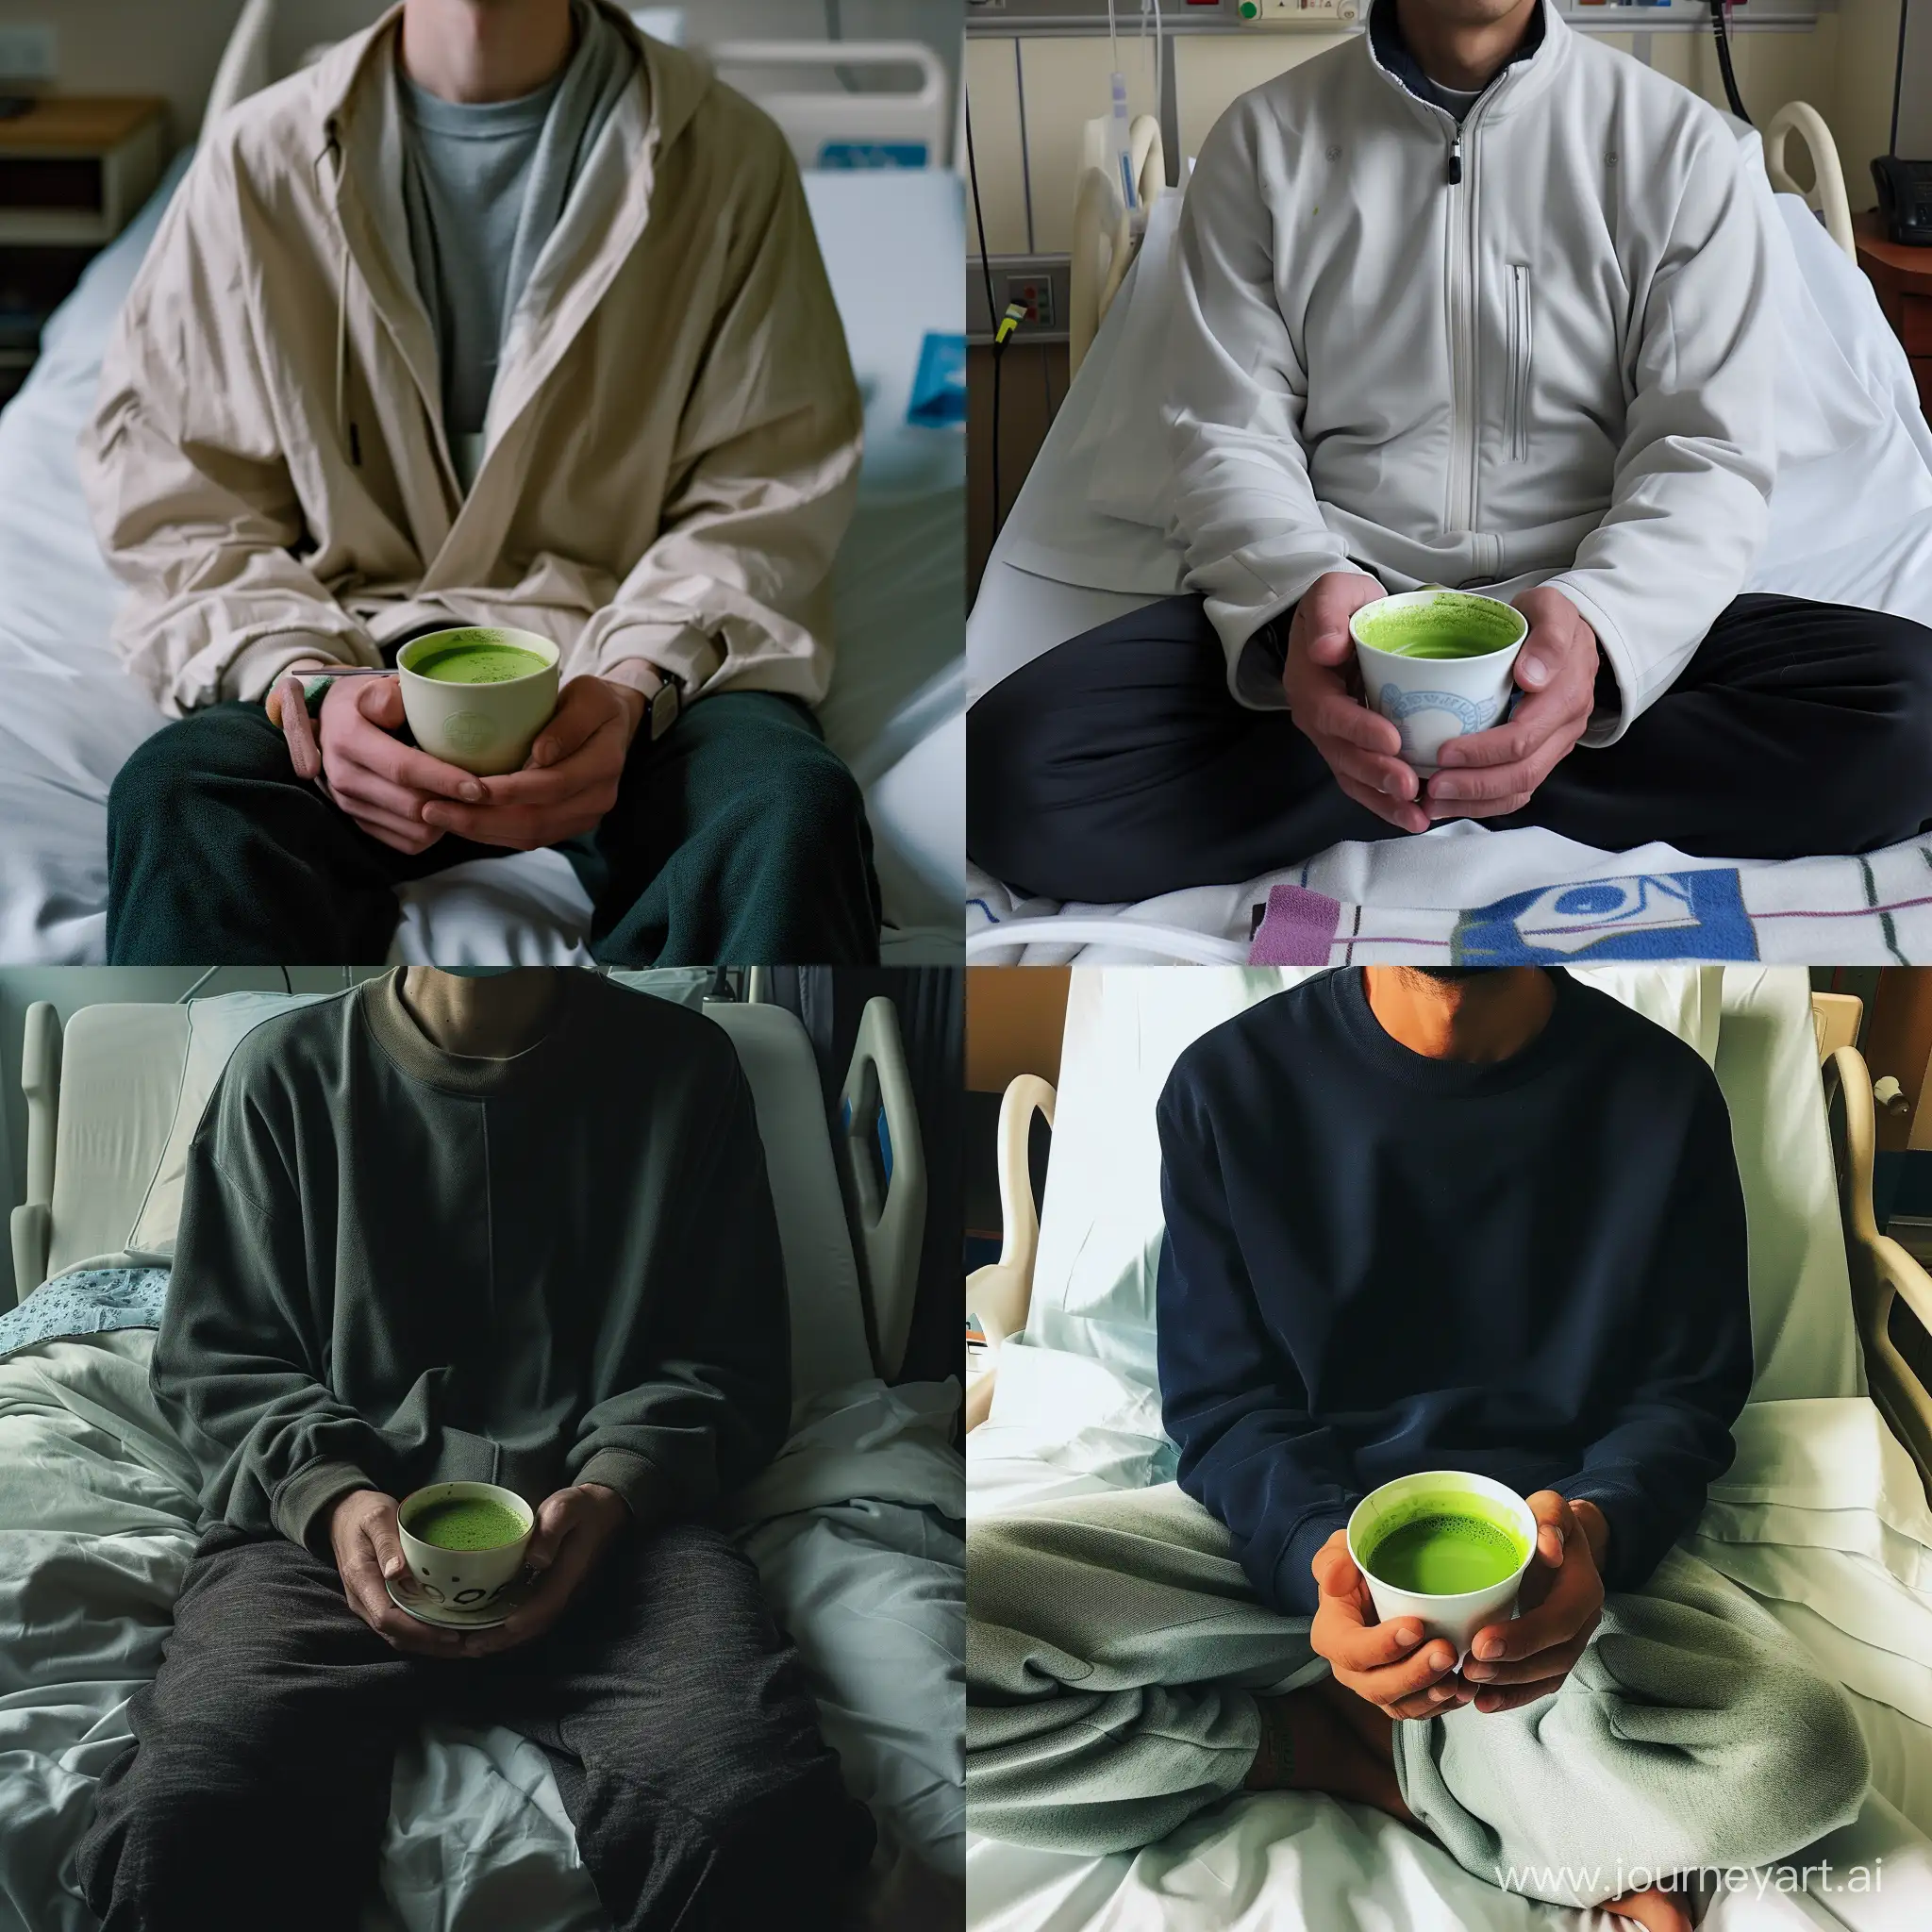 Real and natural photo of a man sitting on a bed in a hospital room holding a cup of matcha tea. Full details of hands, body, face, clothes, cup of matcha tea.